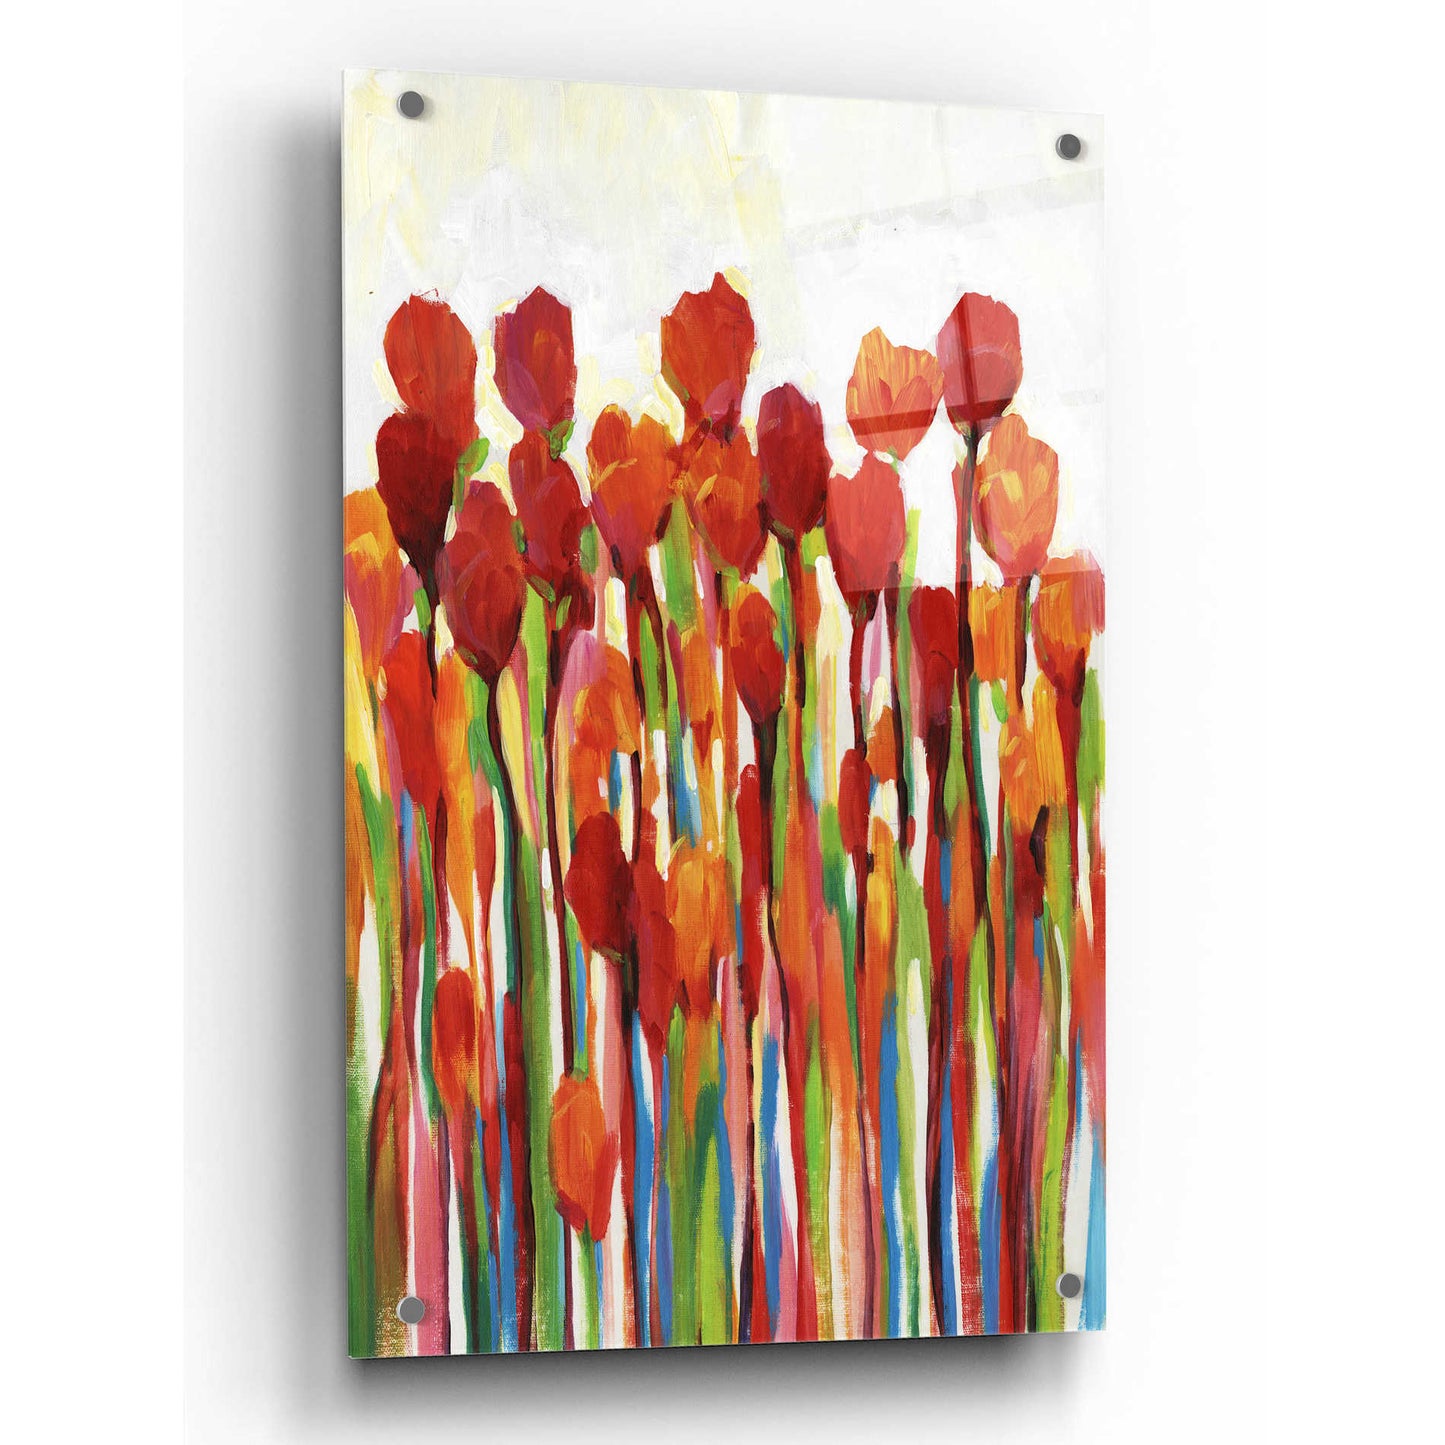 Epic Art 'Bursting with Color II' by Tim O'Toole, Acrylic Glass Wall Art,24x36